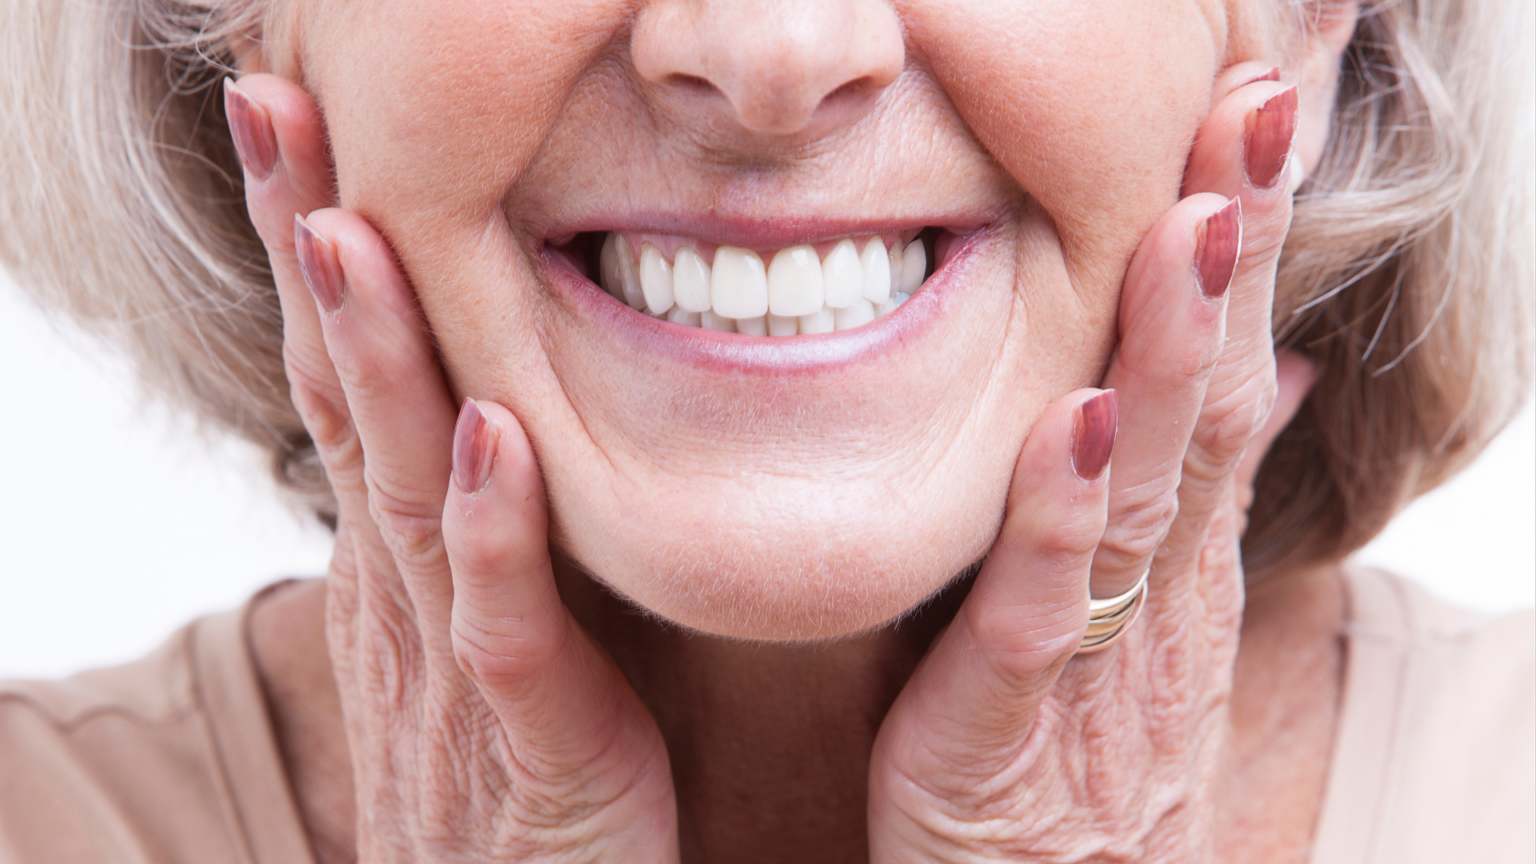 Hybrid Dentures - What’s the Deal?